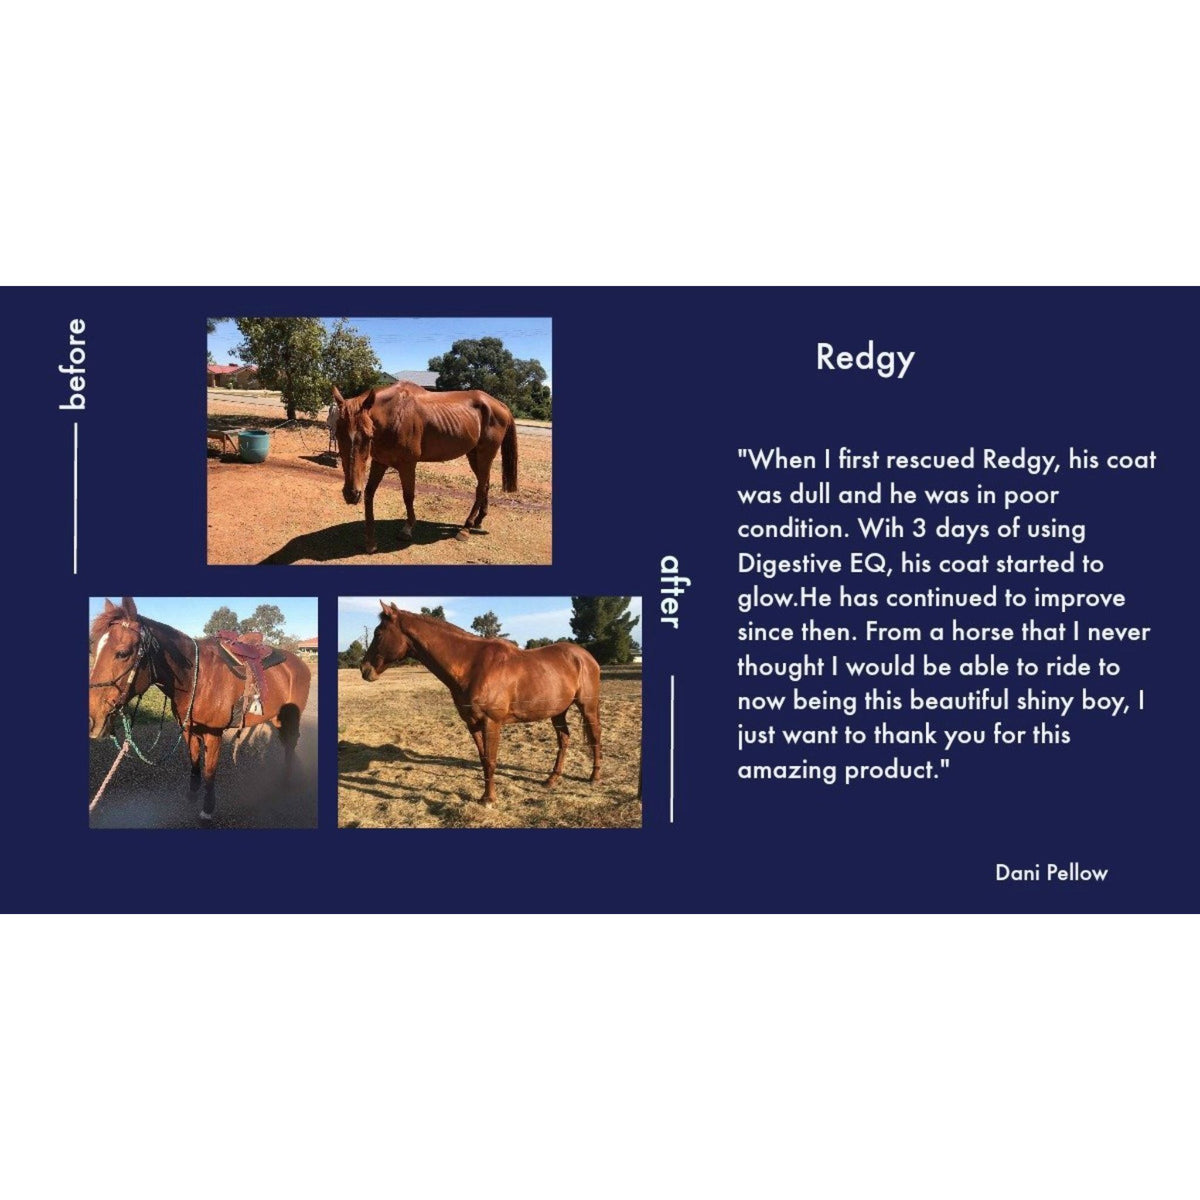 Testimonial images and quote vouching for improvement of horse on product.